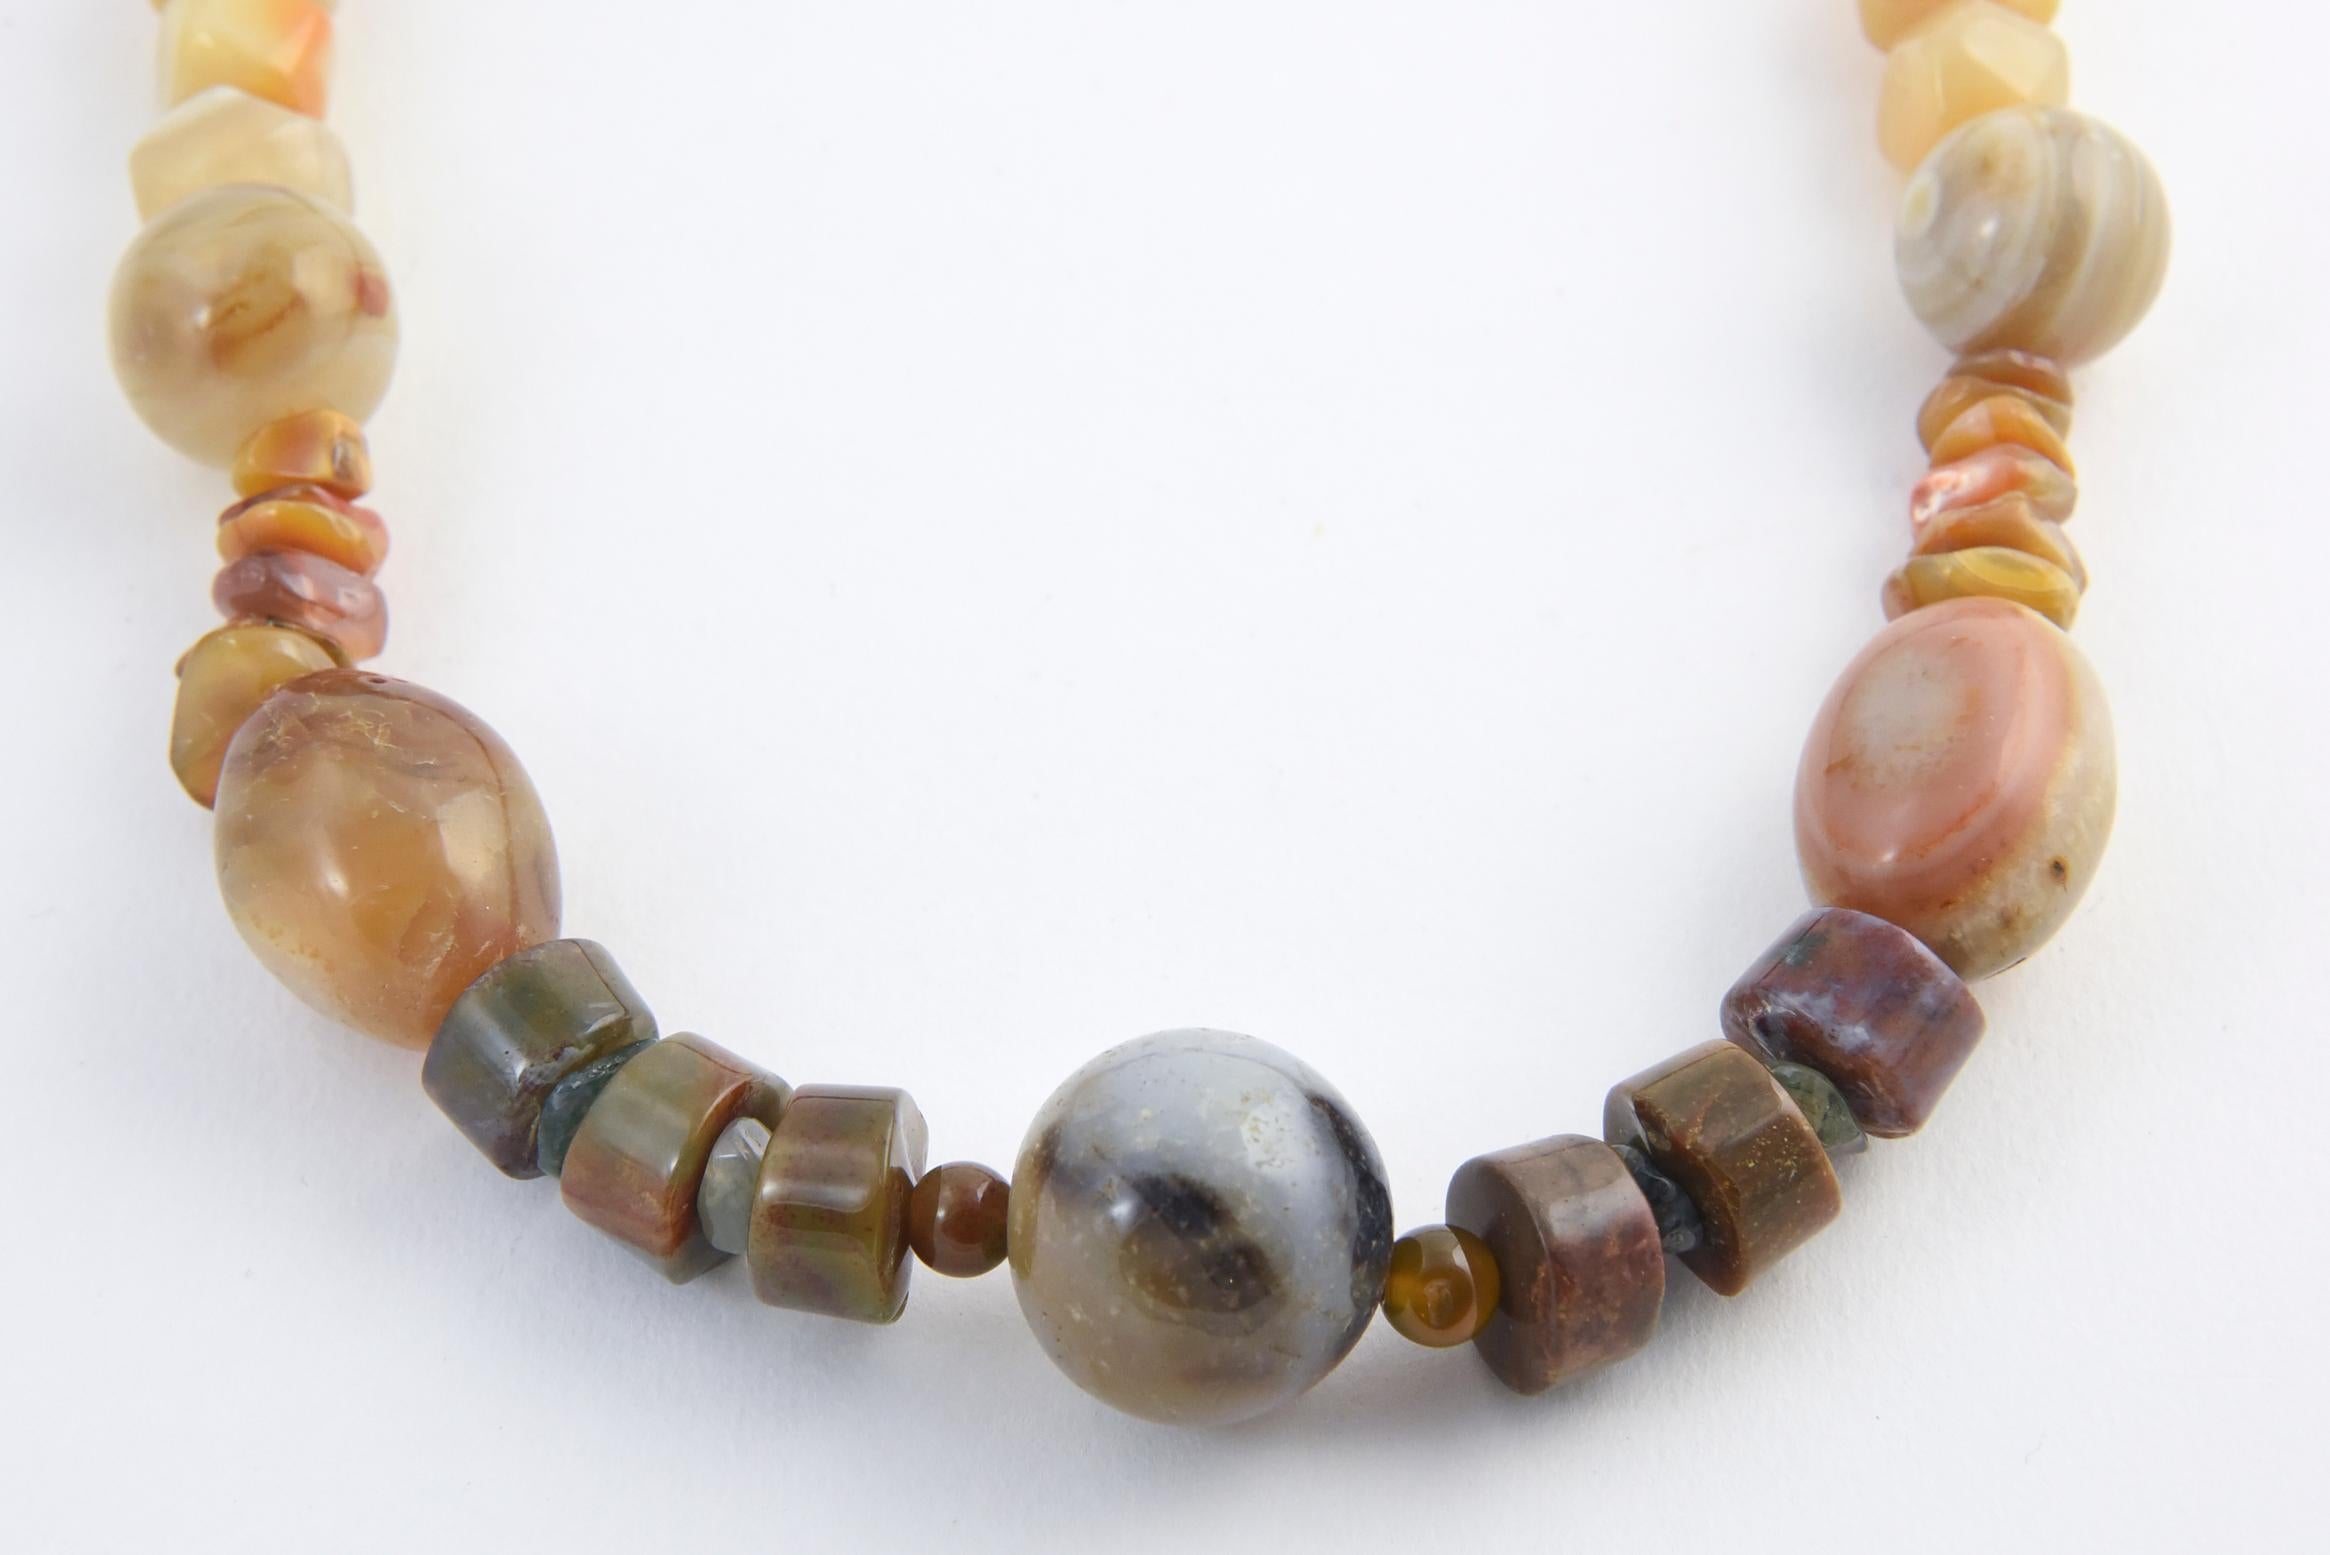 Multicolored agate necklace with rough amethyst accents and brass-and-Bakelite hook clasp. Agate pieces range in shape from round to tumbled. Largest bead, 25mm. Clasp has a chip and traces of glue.